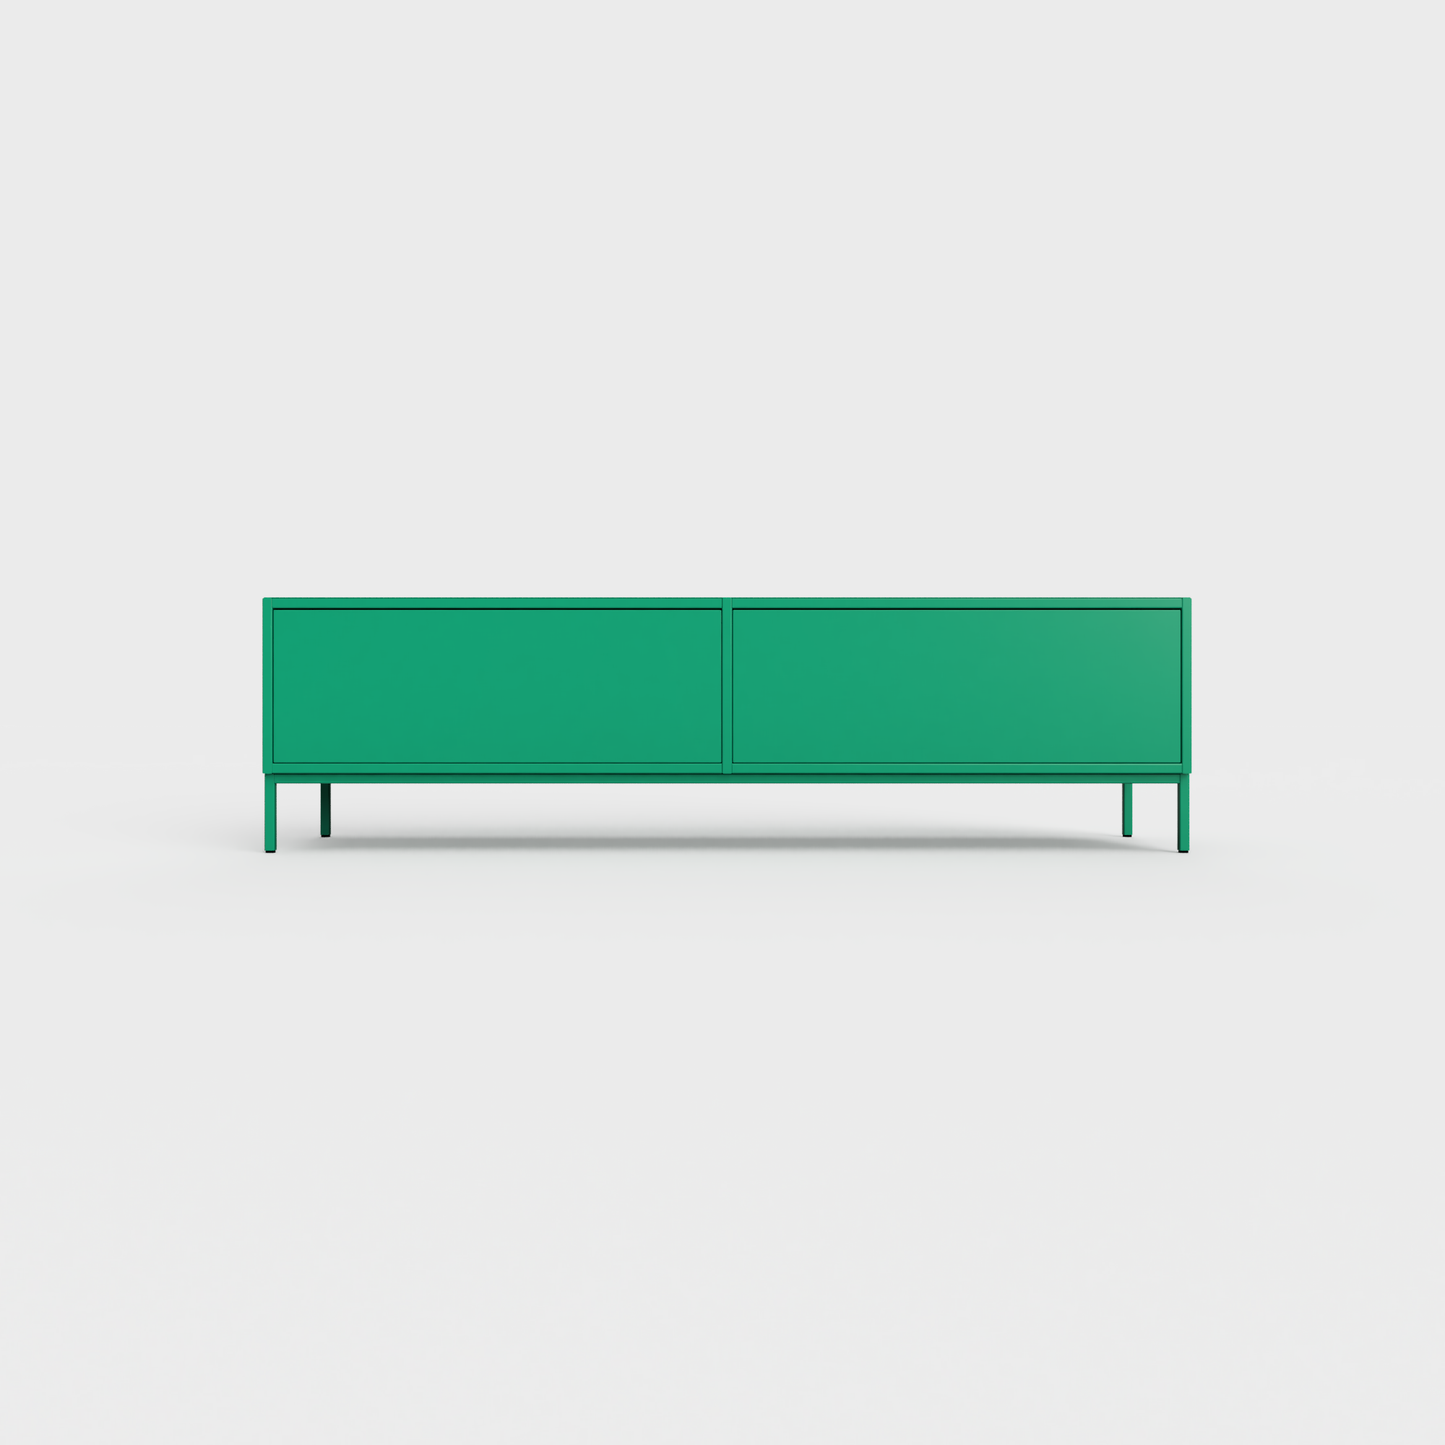 Prunus 01 Lowboard in Avocado color, powder-coated steel, elegant and modern piece of furniture for your living room